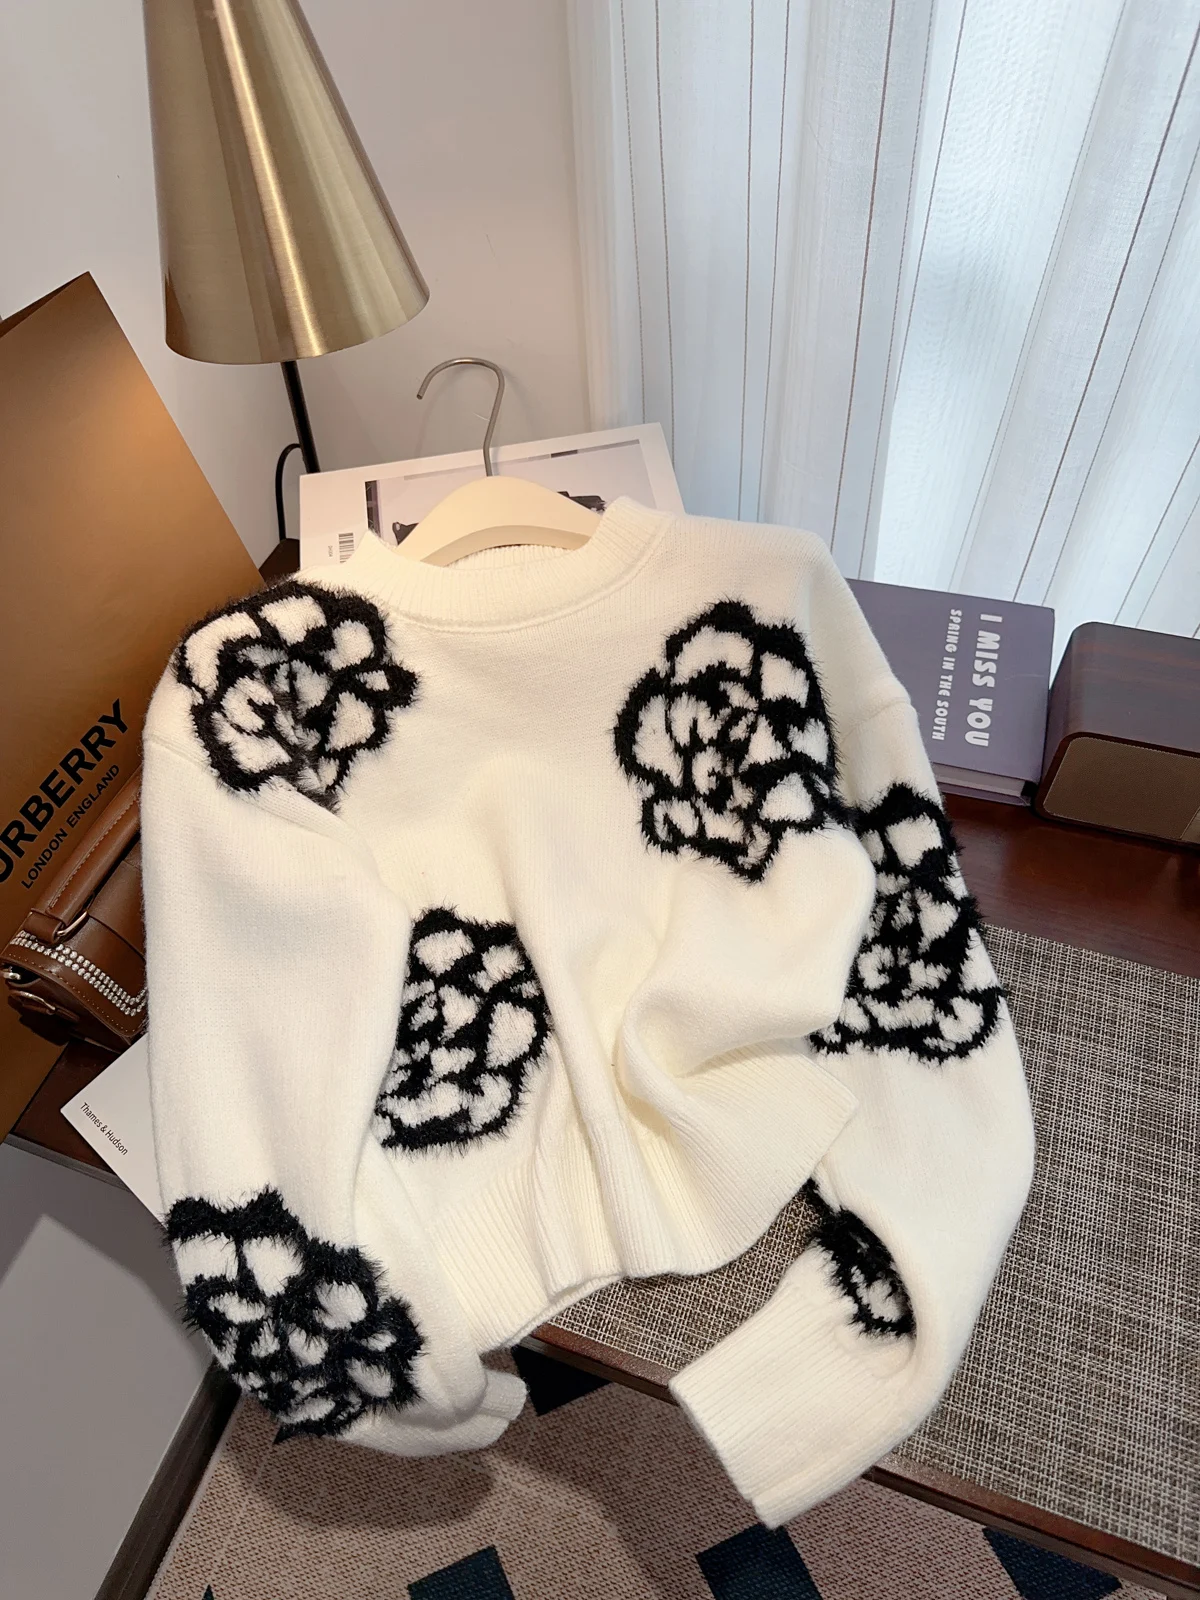 

Runway Flower Sweater Women Long Sleeve Tops Casual High Street Knitwear Laides Sweaters Jumper Black Knitted Pullover Winter